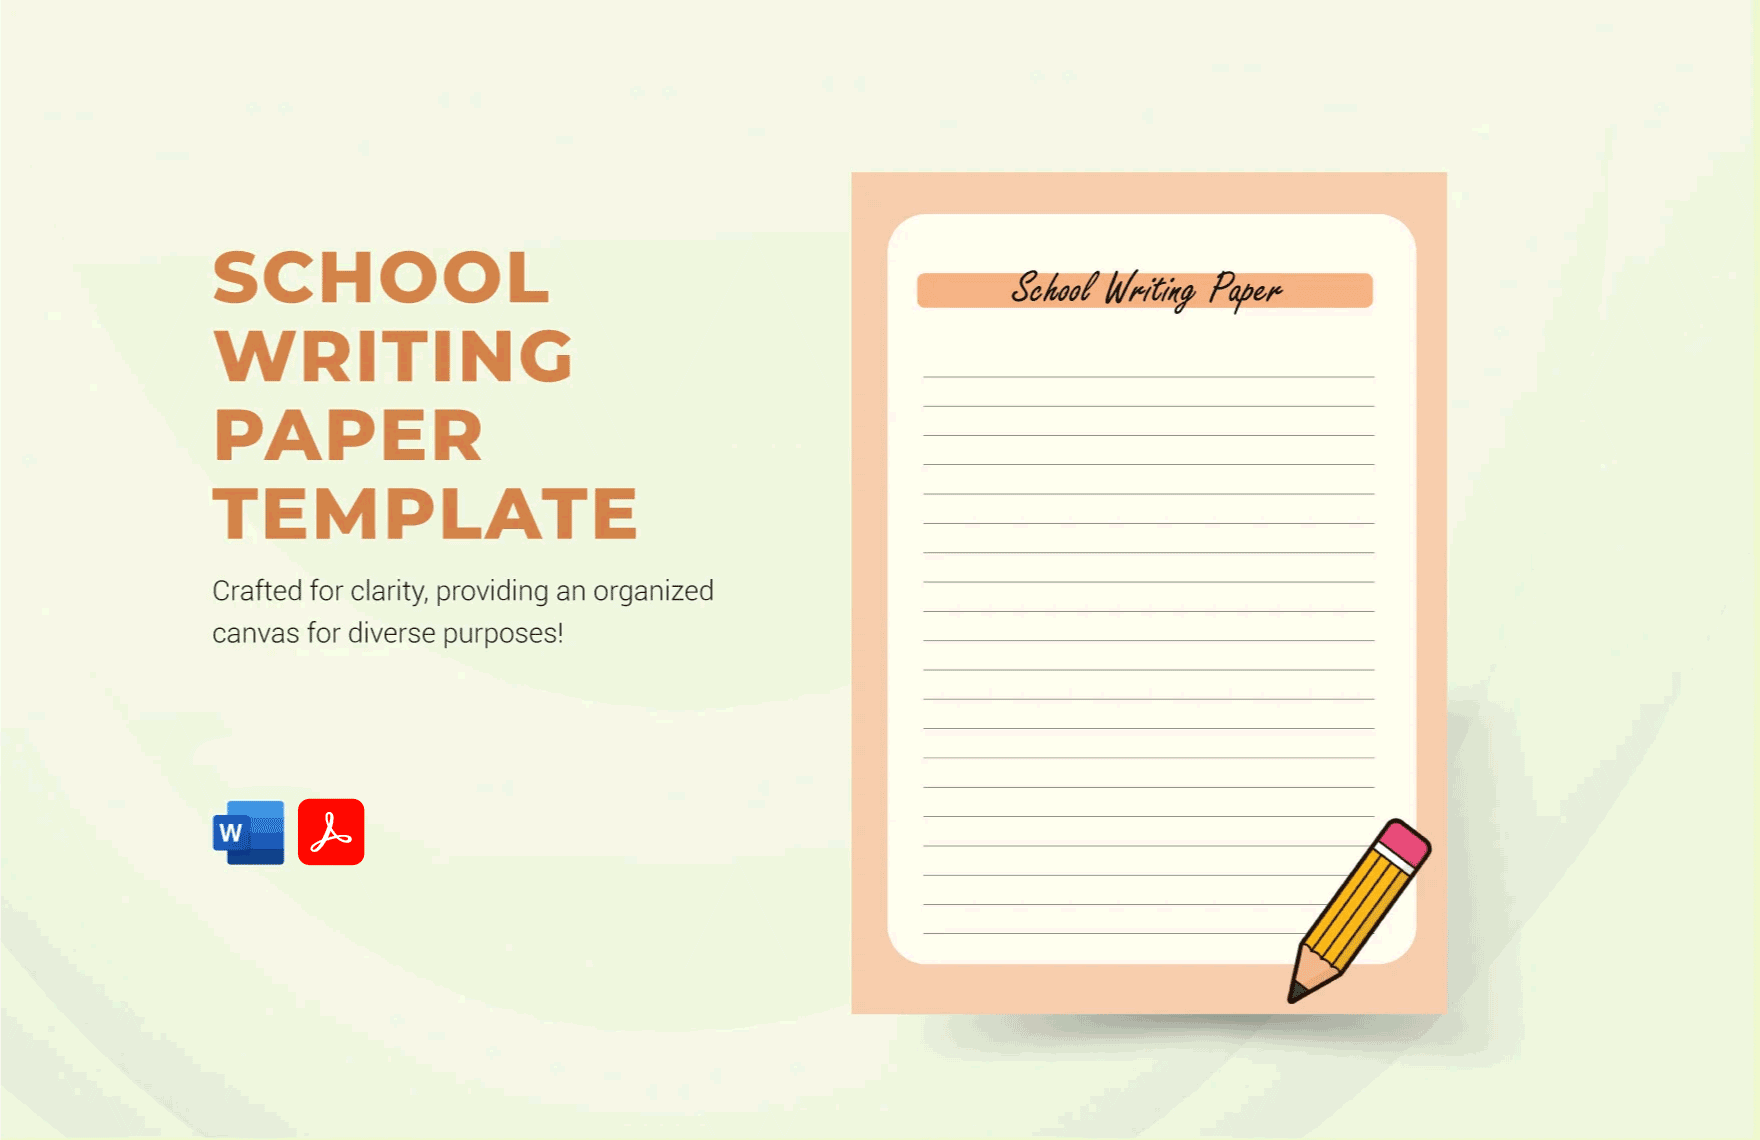 School Writing Paper Template